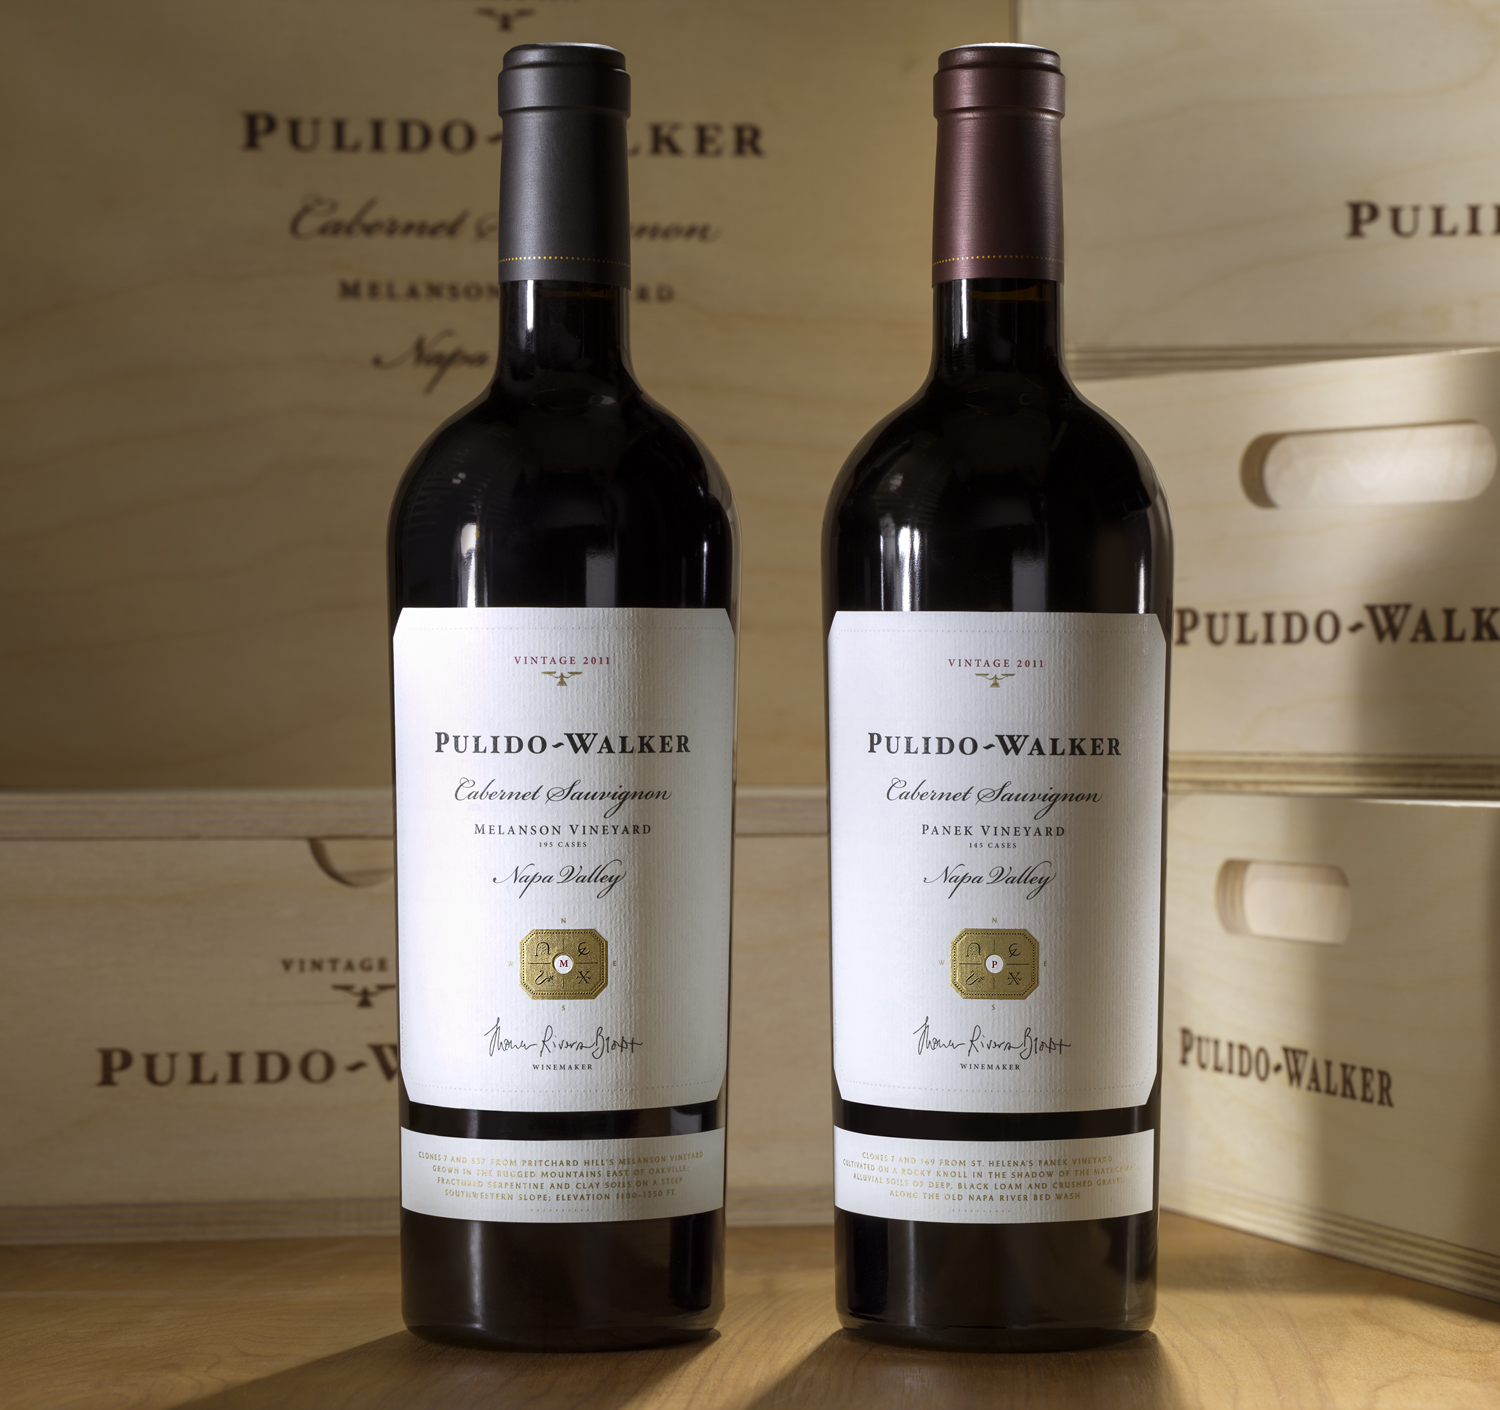 The 2011 Panek Vineyard Cabernet Sauvignon is sold out; the 2011 Melanson Vineyard Cabernet Sauvignon will be released in August 2014.